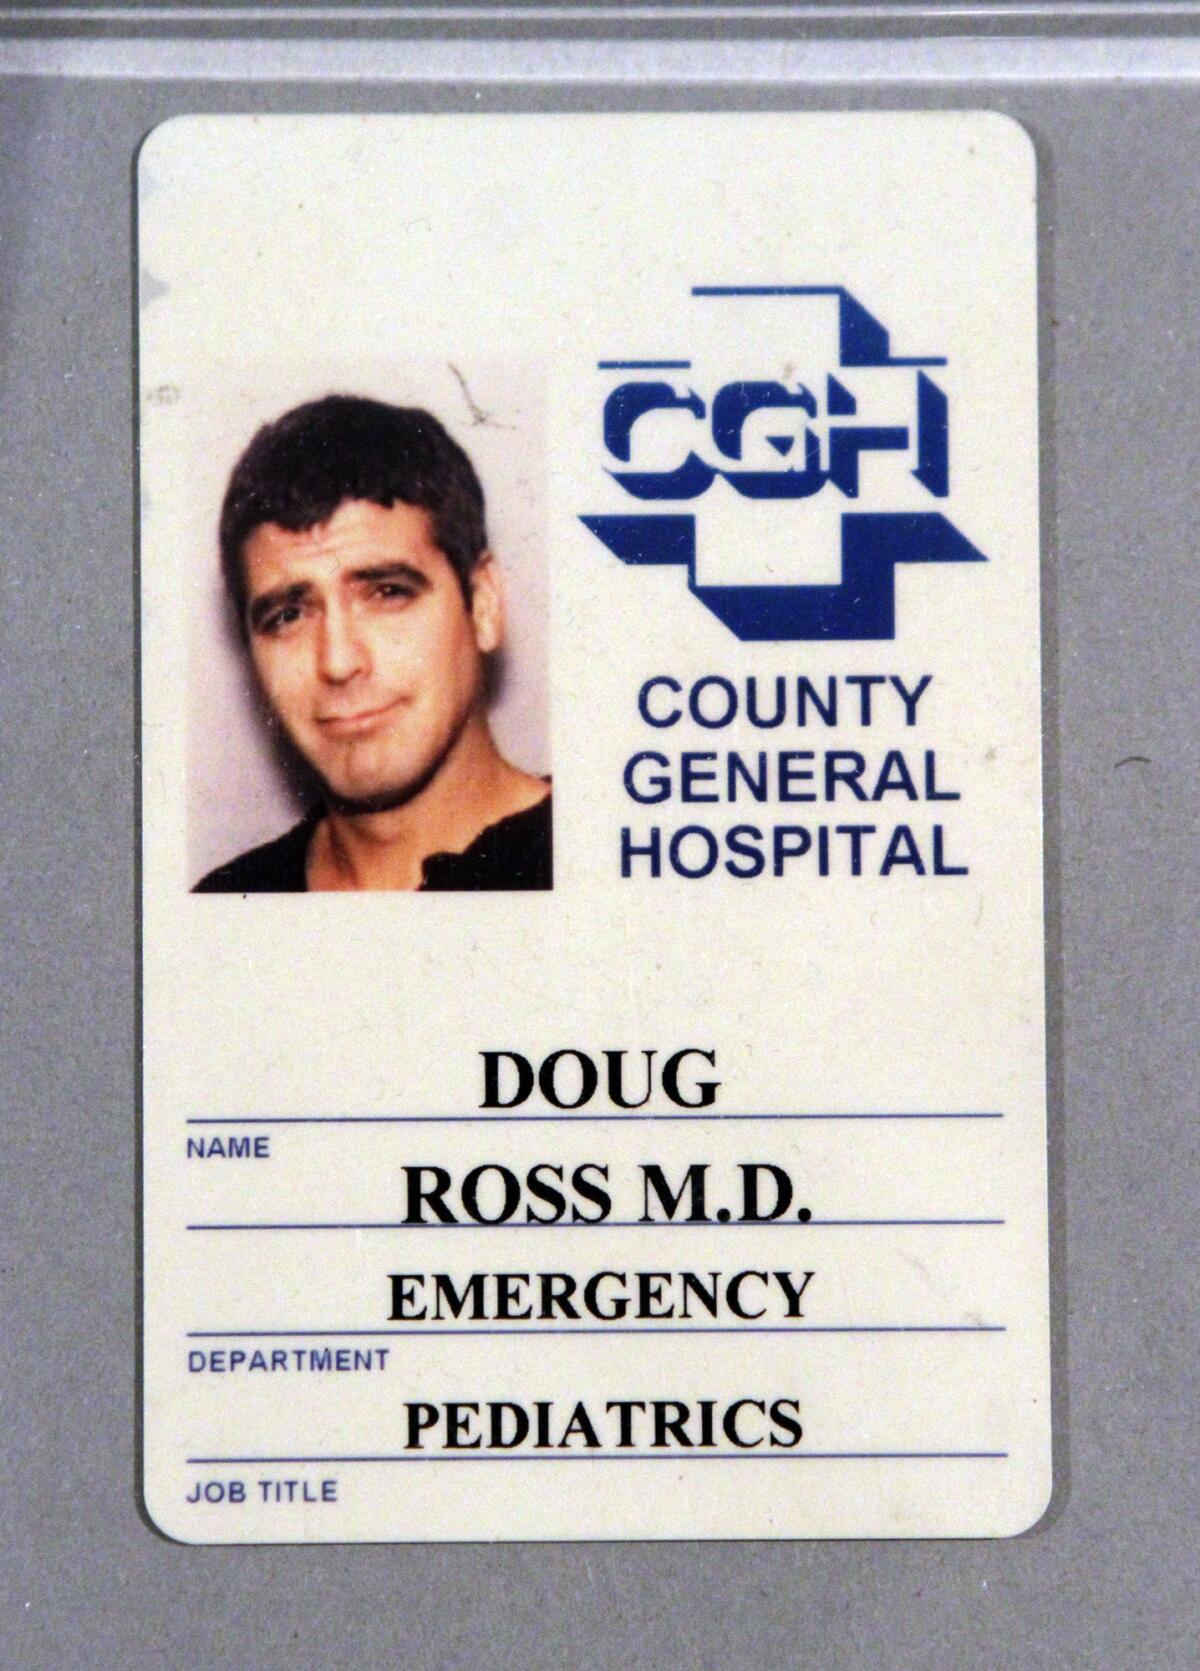 Dr. Doug Ross, played by George Clooney in the TV show "ER," is likely a high earner based on his short first name, according to a recent study.